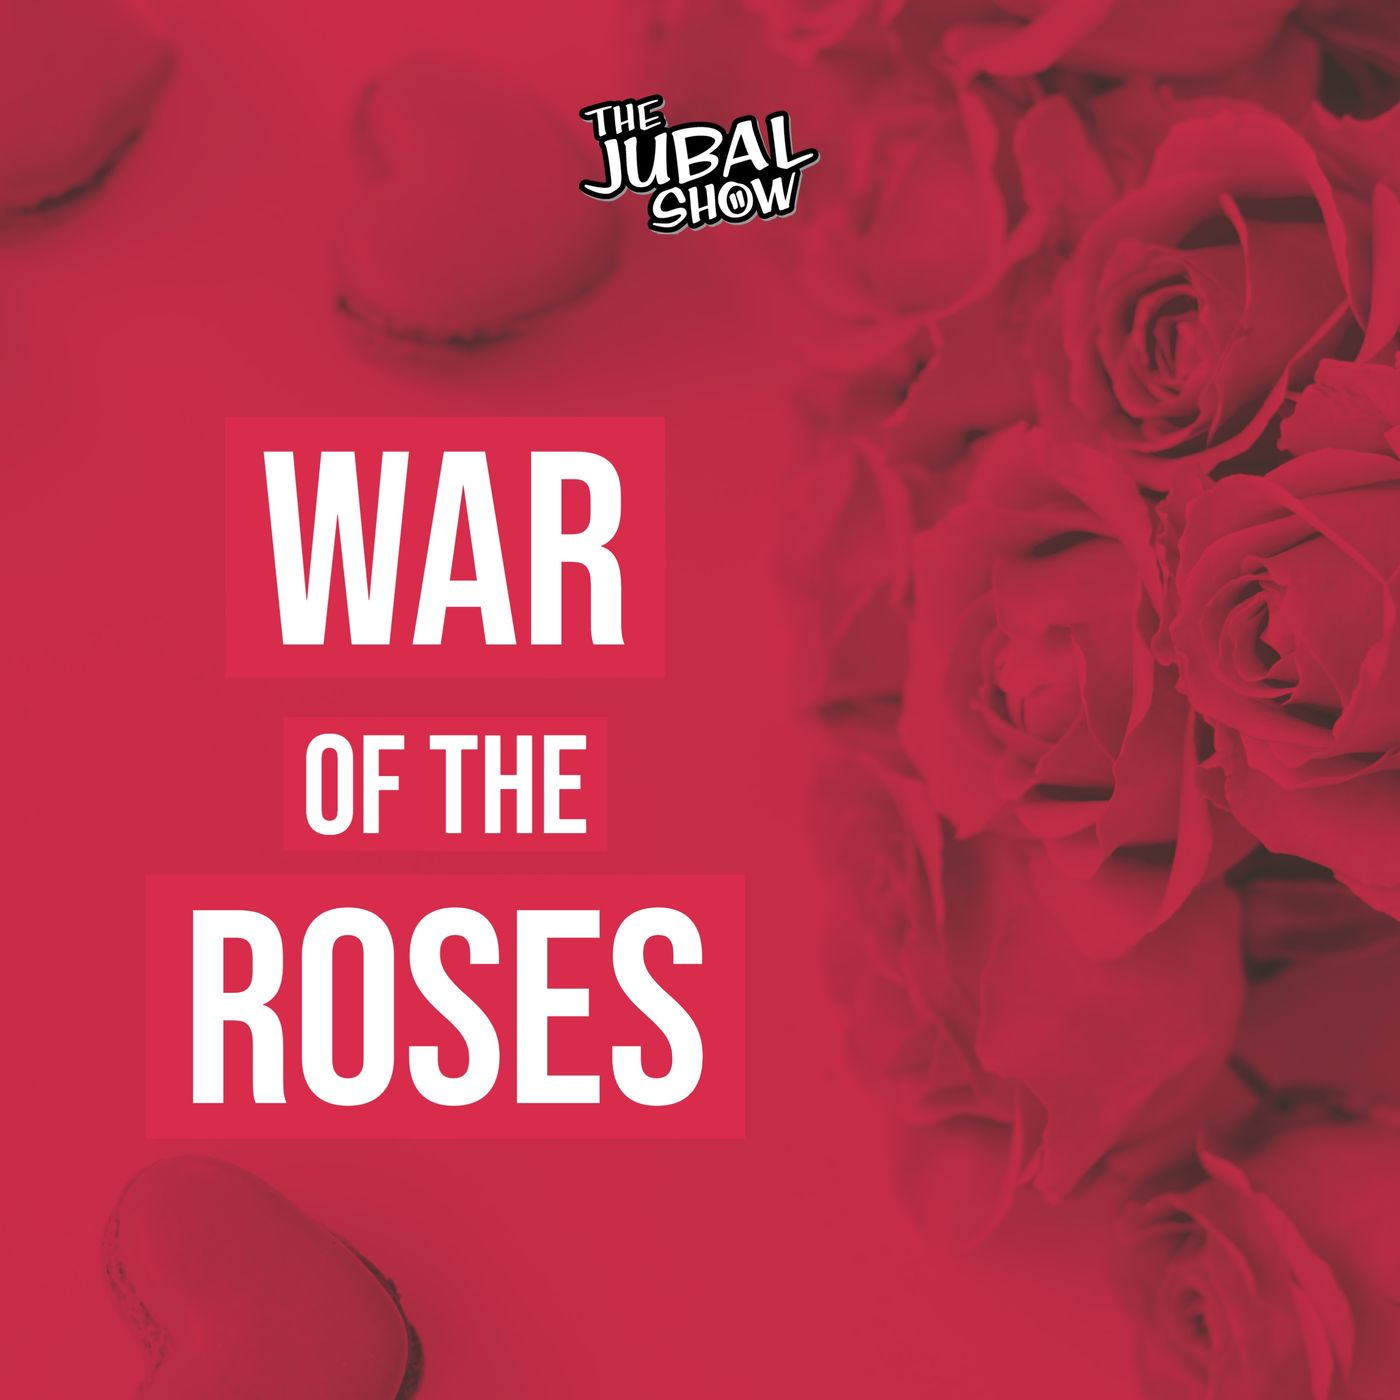 Someone needs attention in this War of the Roses!